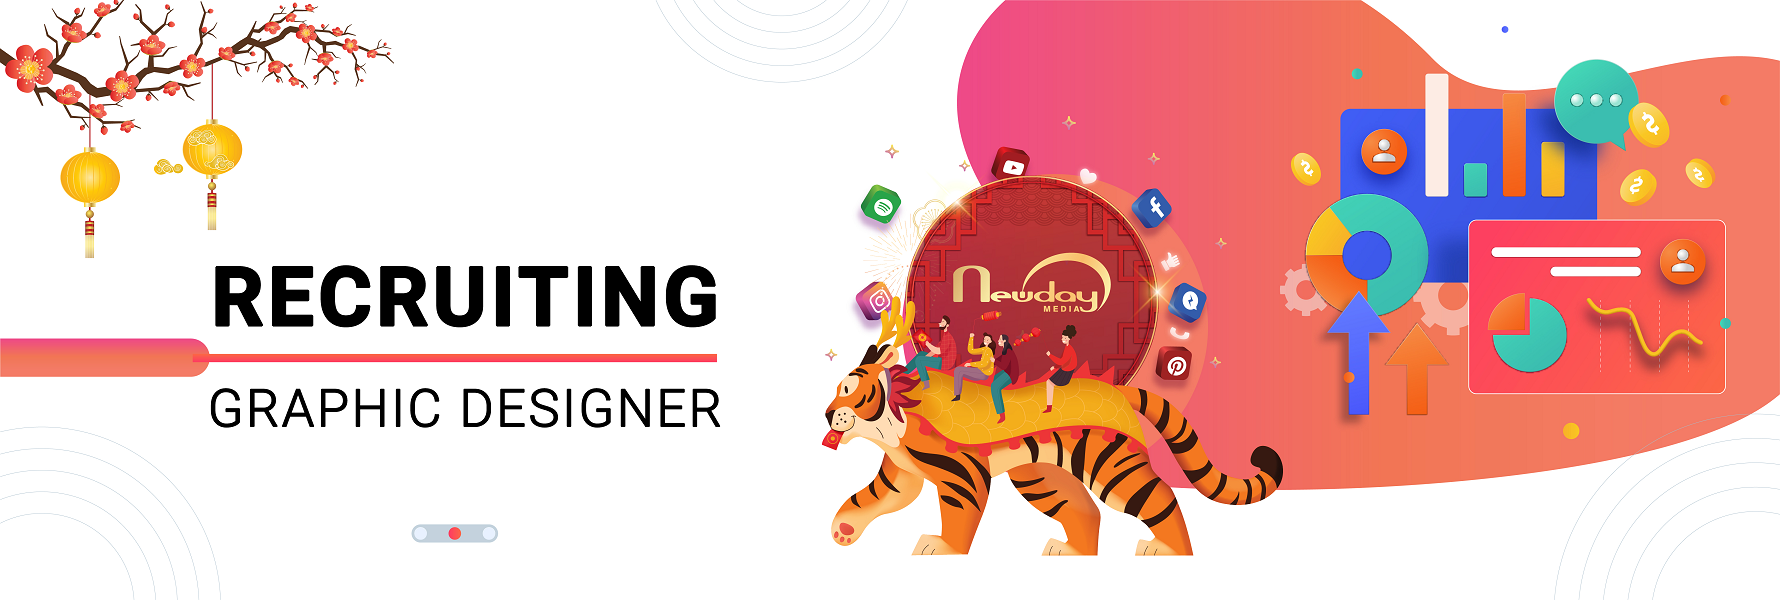 NEWDAY MEDIA TUYỂN DỤNG GRAPHIC DESIGNER